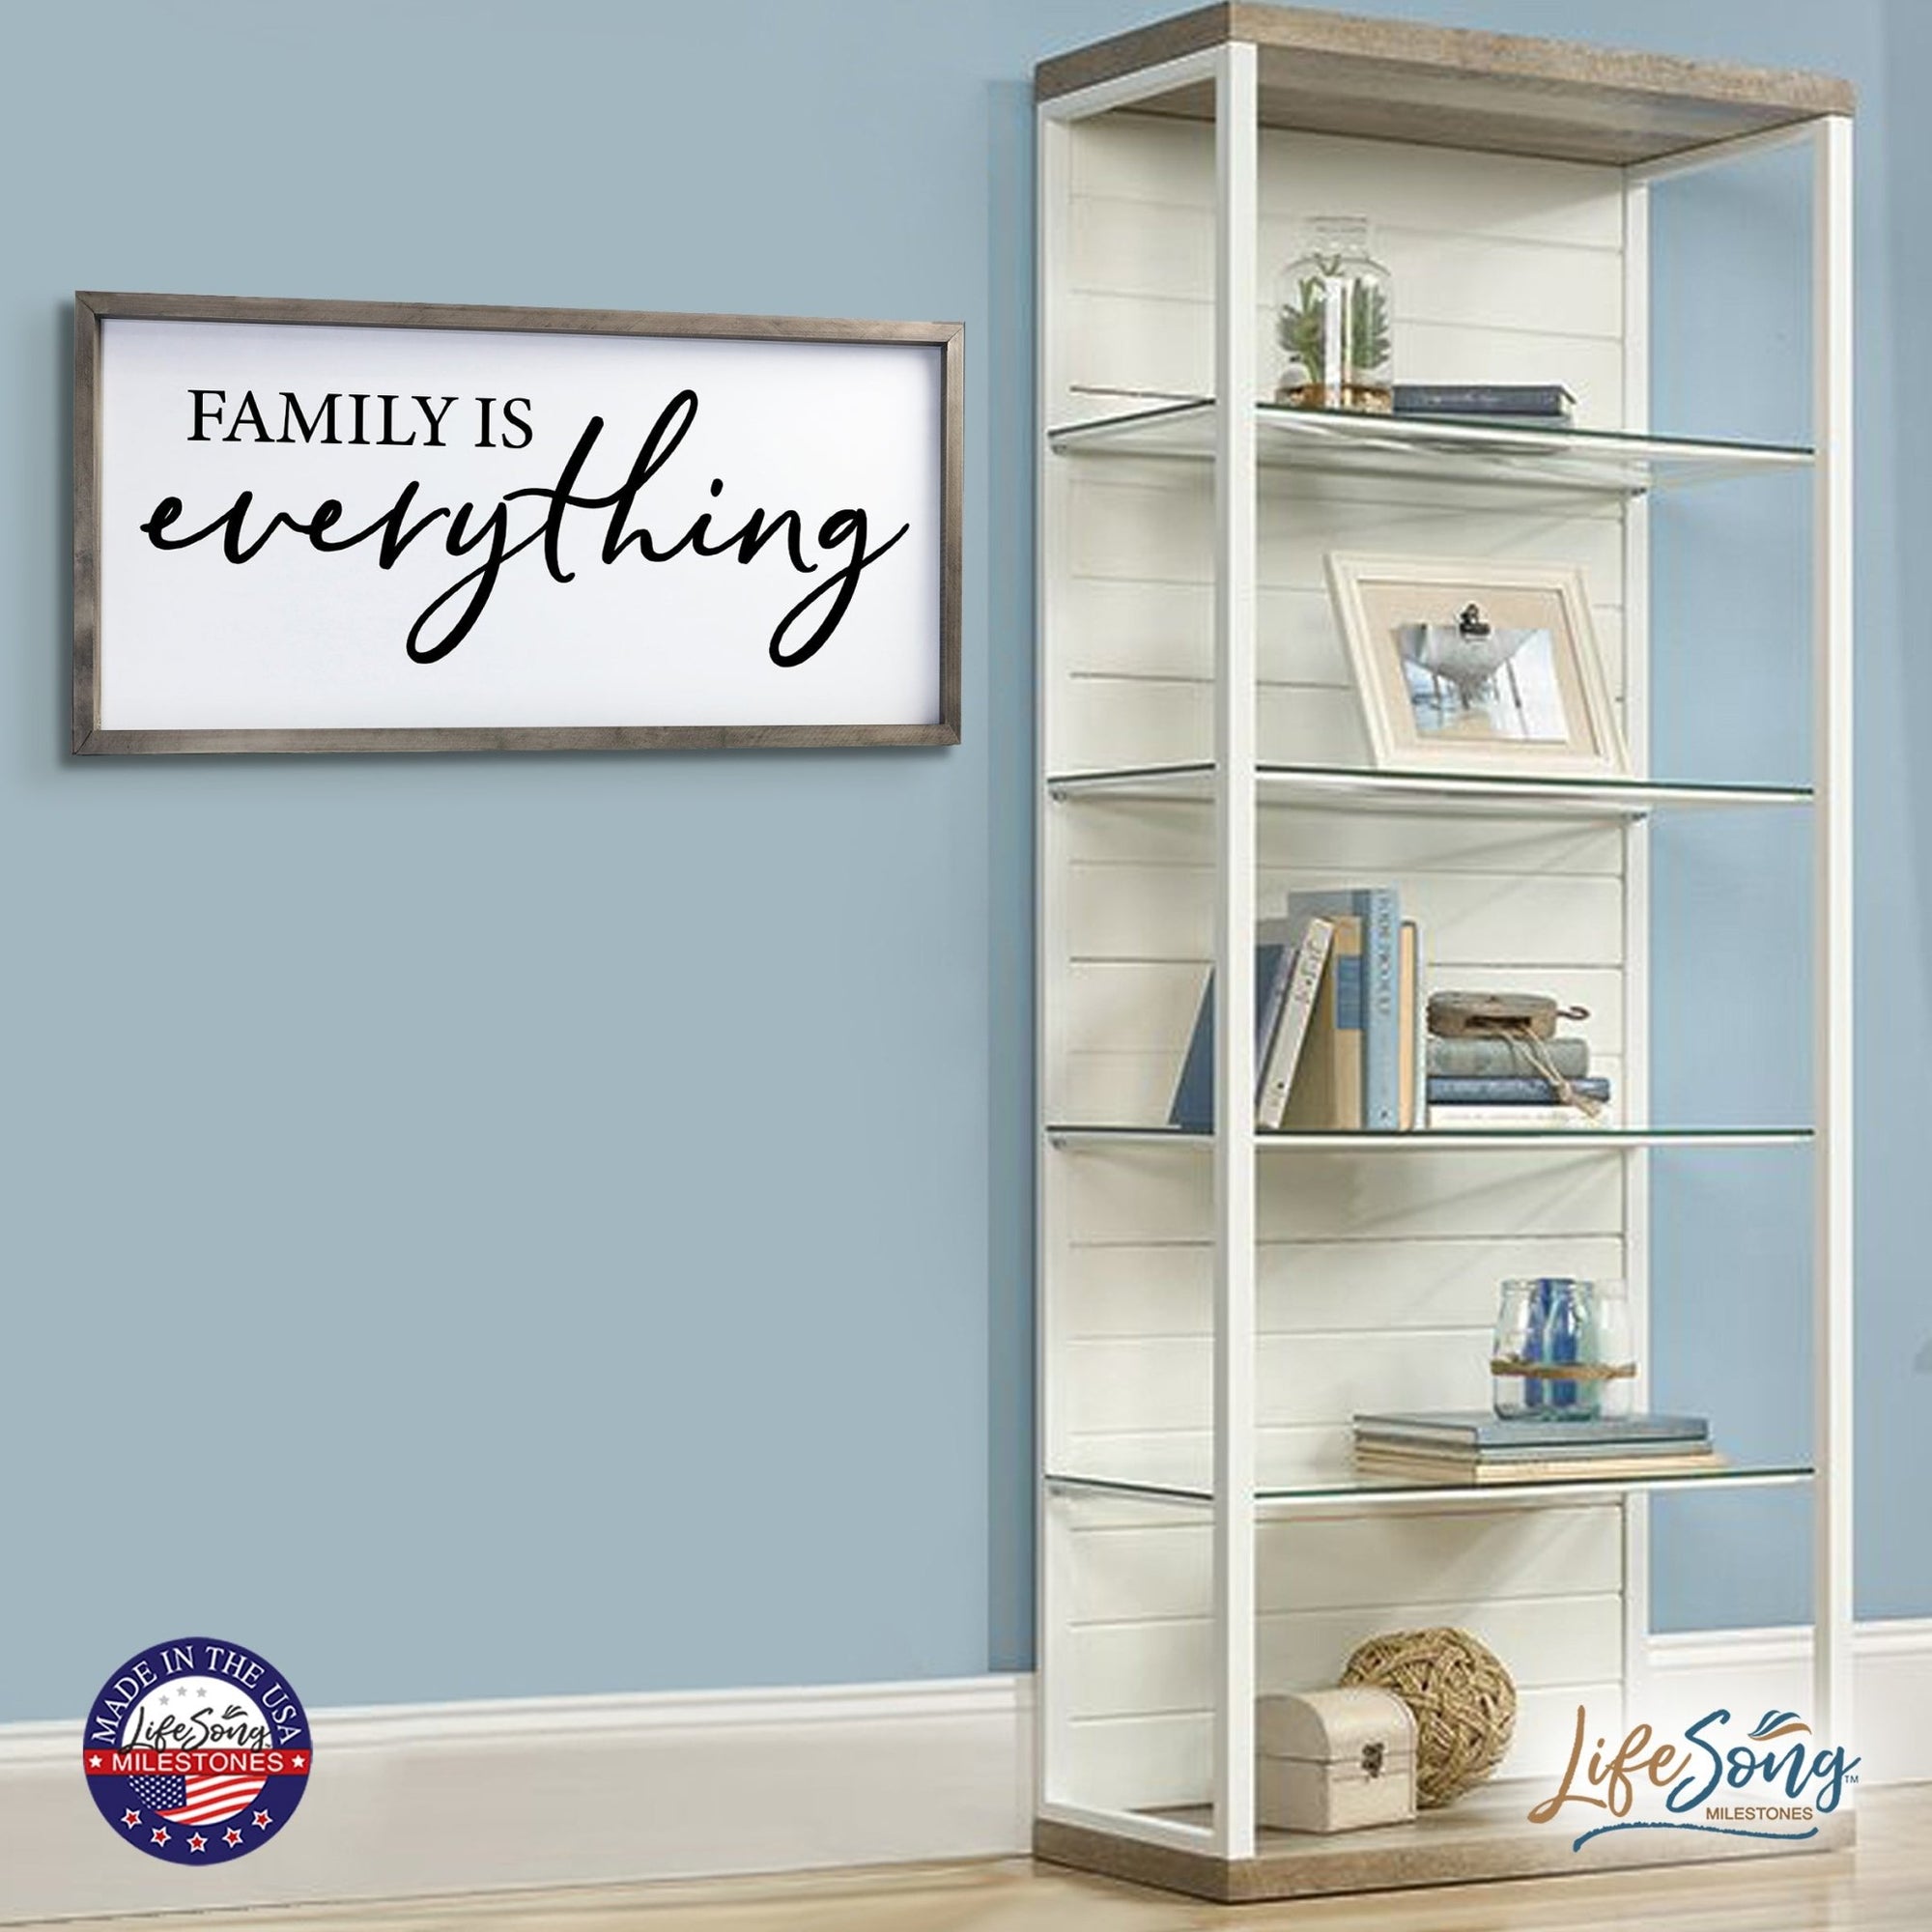 Large Family Wall Decor Quote Sign For Home 18 x 36 - Family Is Everything - LifeSong Milestones